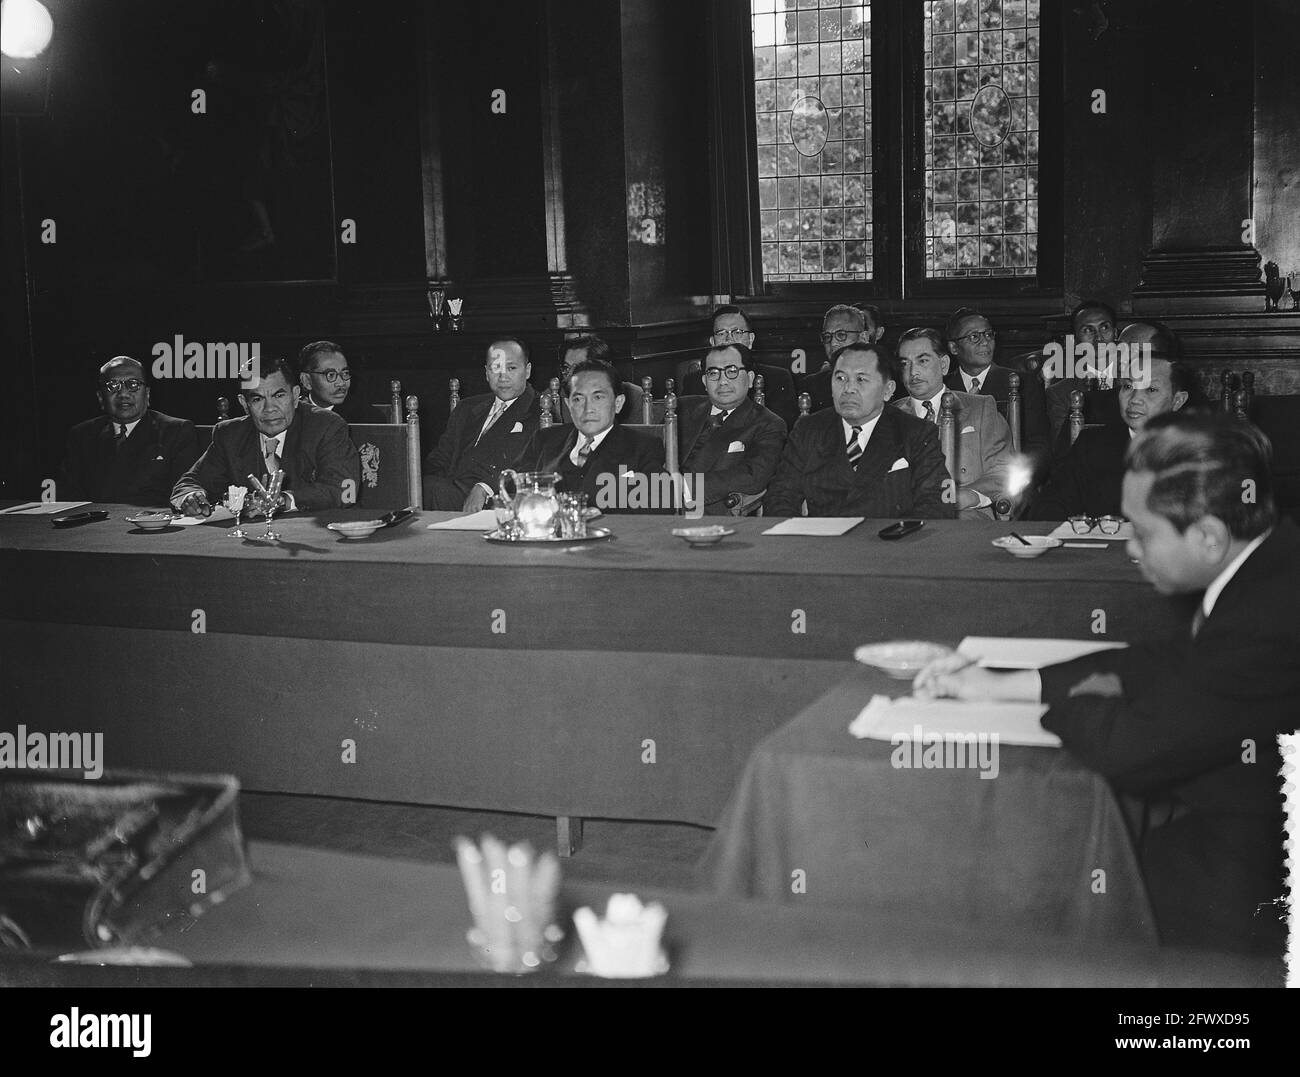 Opening Union Conference in Binnenhof, Indonesia delegation, June 29, 1954, Openings, Delegations, The Netherlands, 20th century press agency photo, n Stock Photo